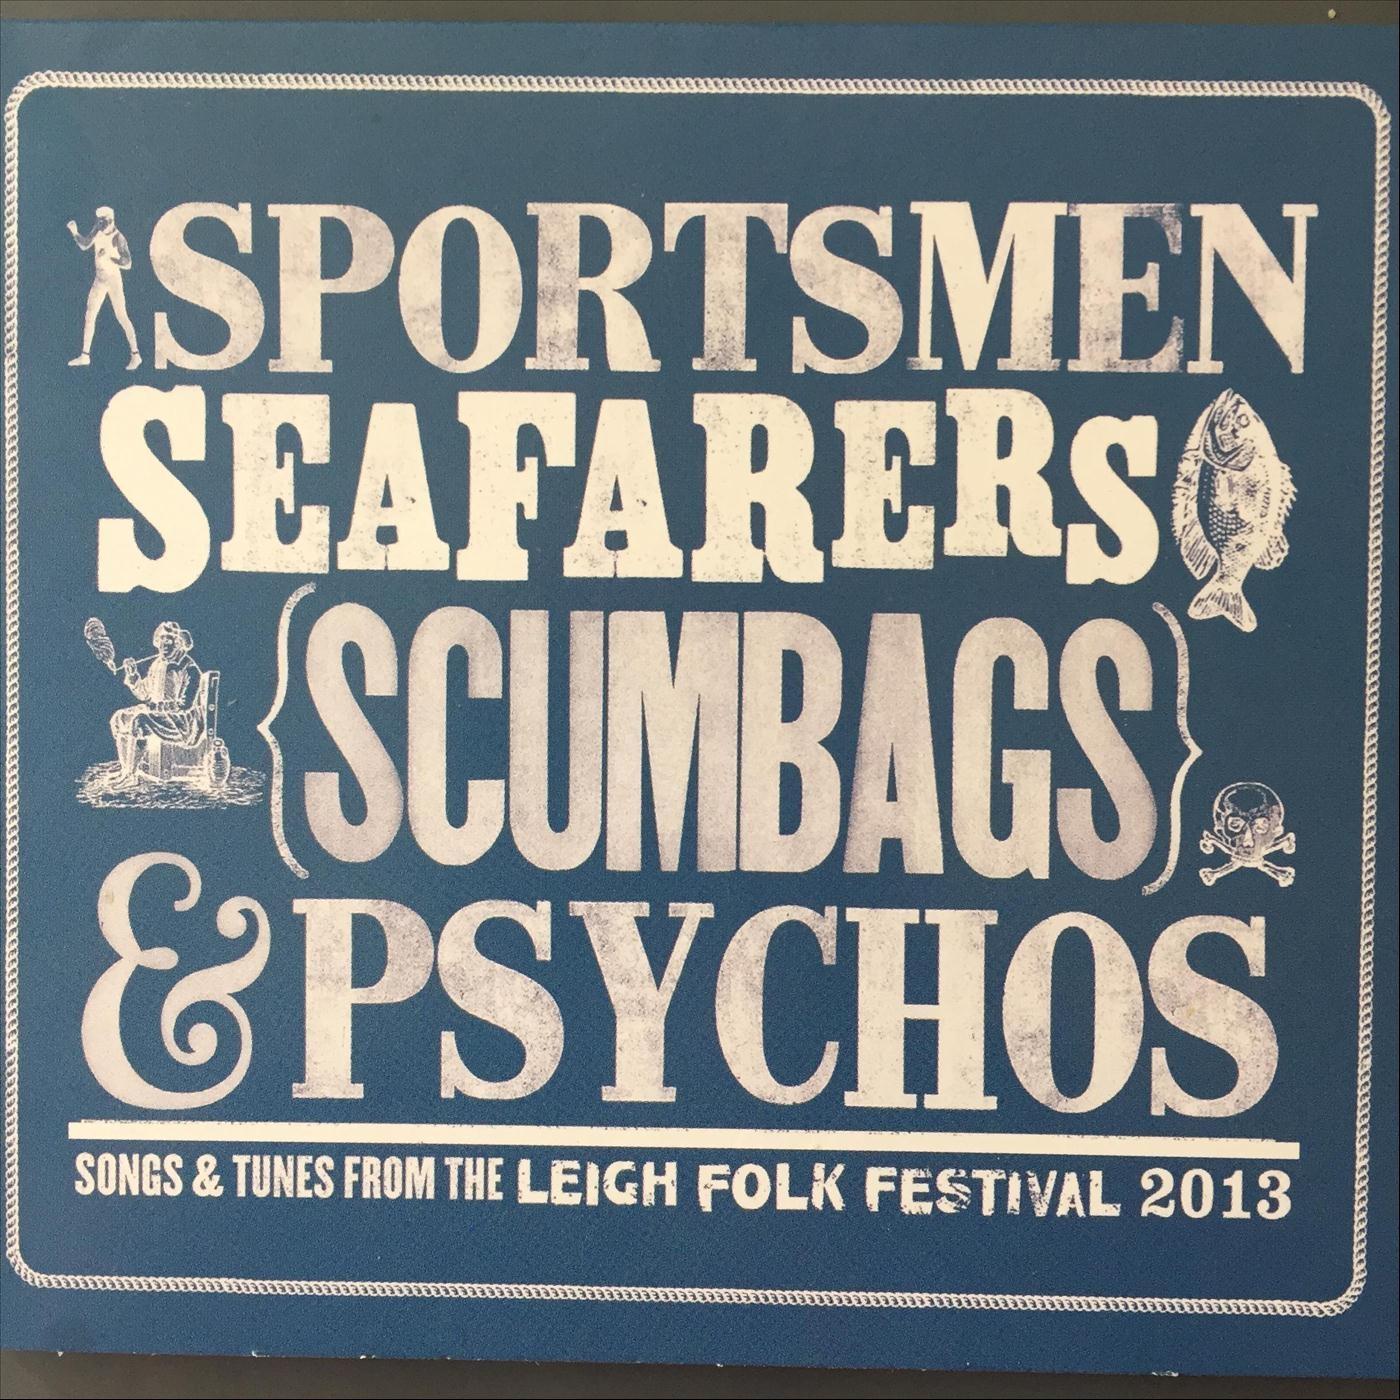 Sportsmen, Seafarers, Scumbags & Psychos: Songs & Tunes from the Leigh Folk Festival 2013